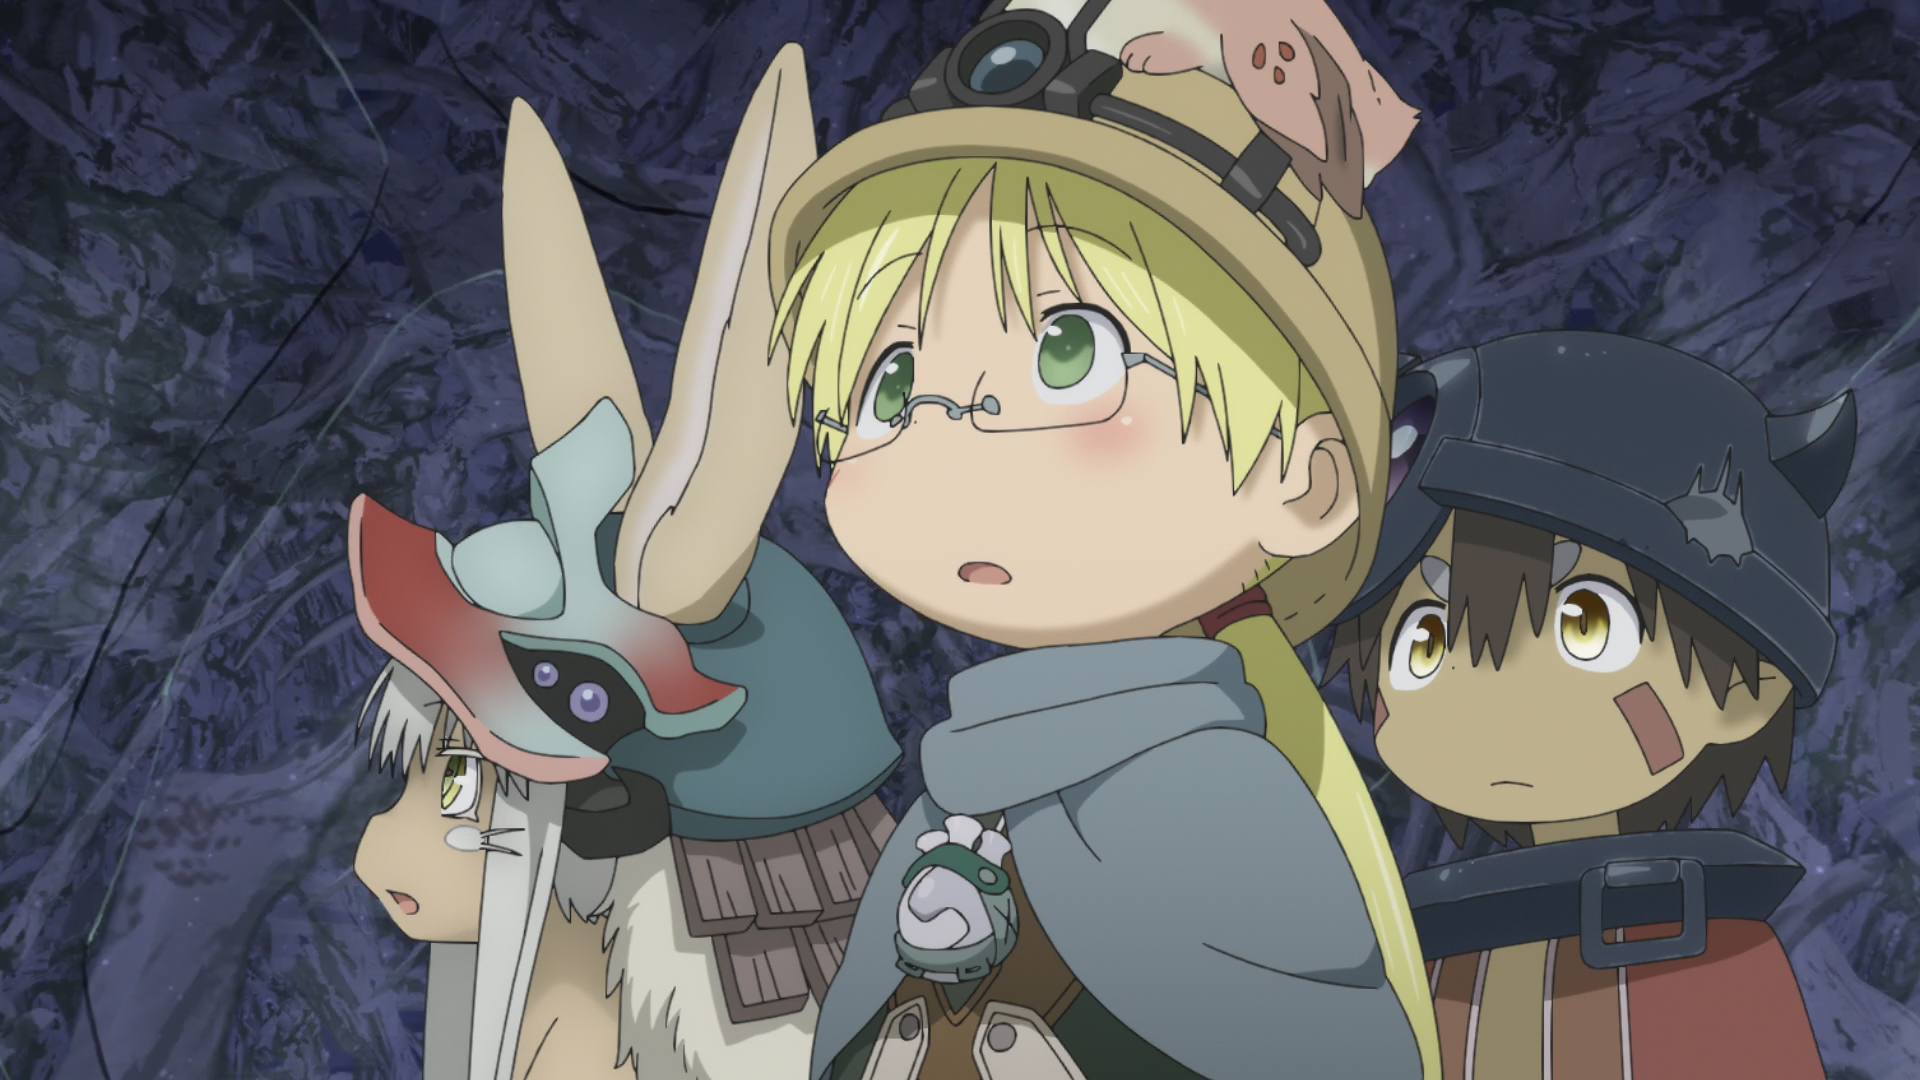 Made in Abyss Collection Review • Anime UK News